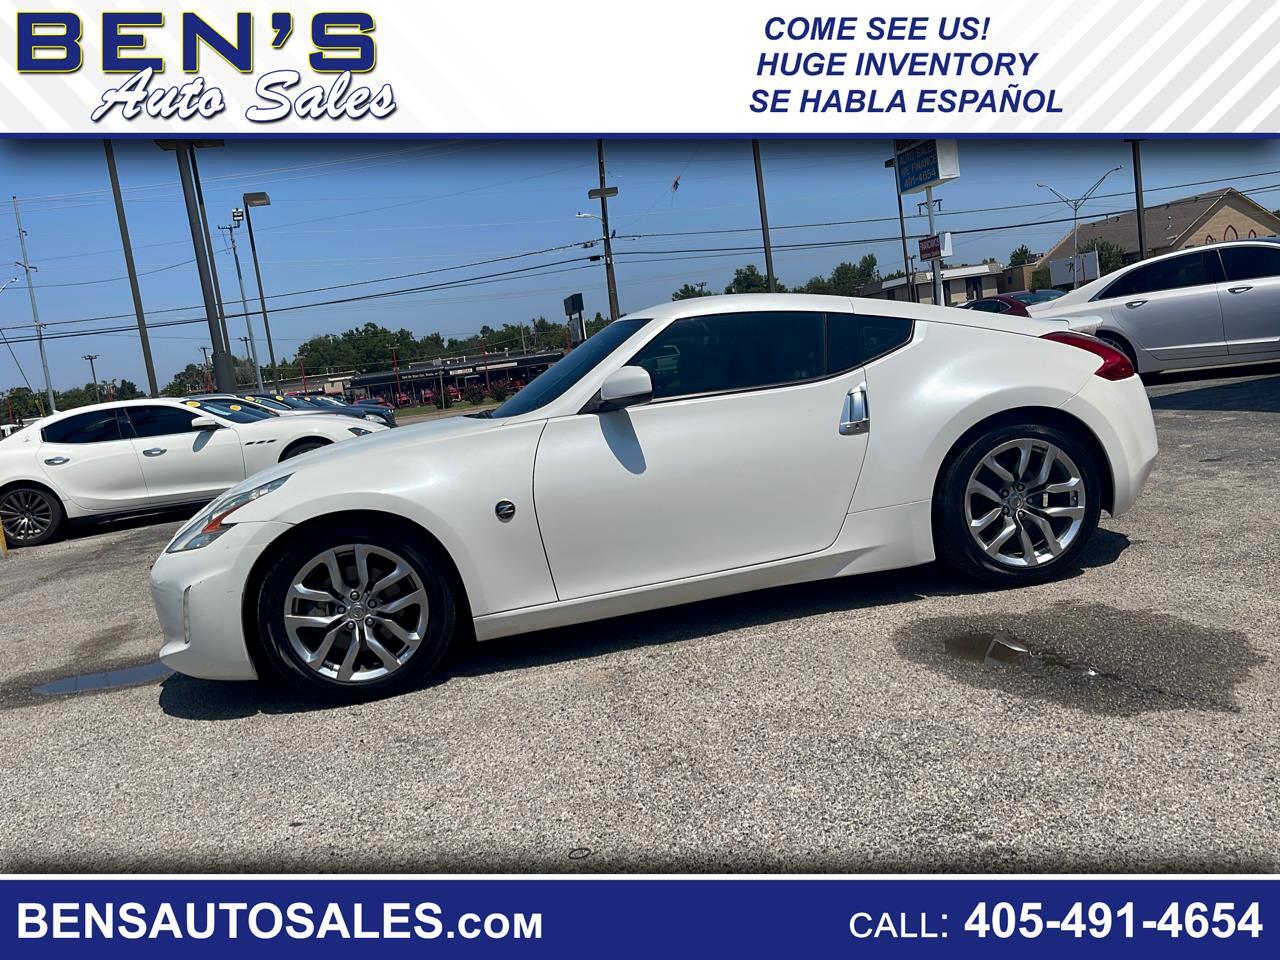 2013 Nissan Z 370Z Touring Coupe